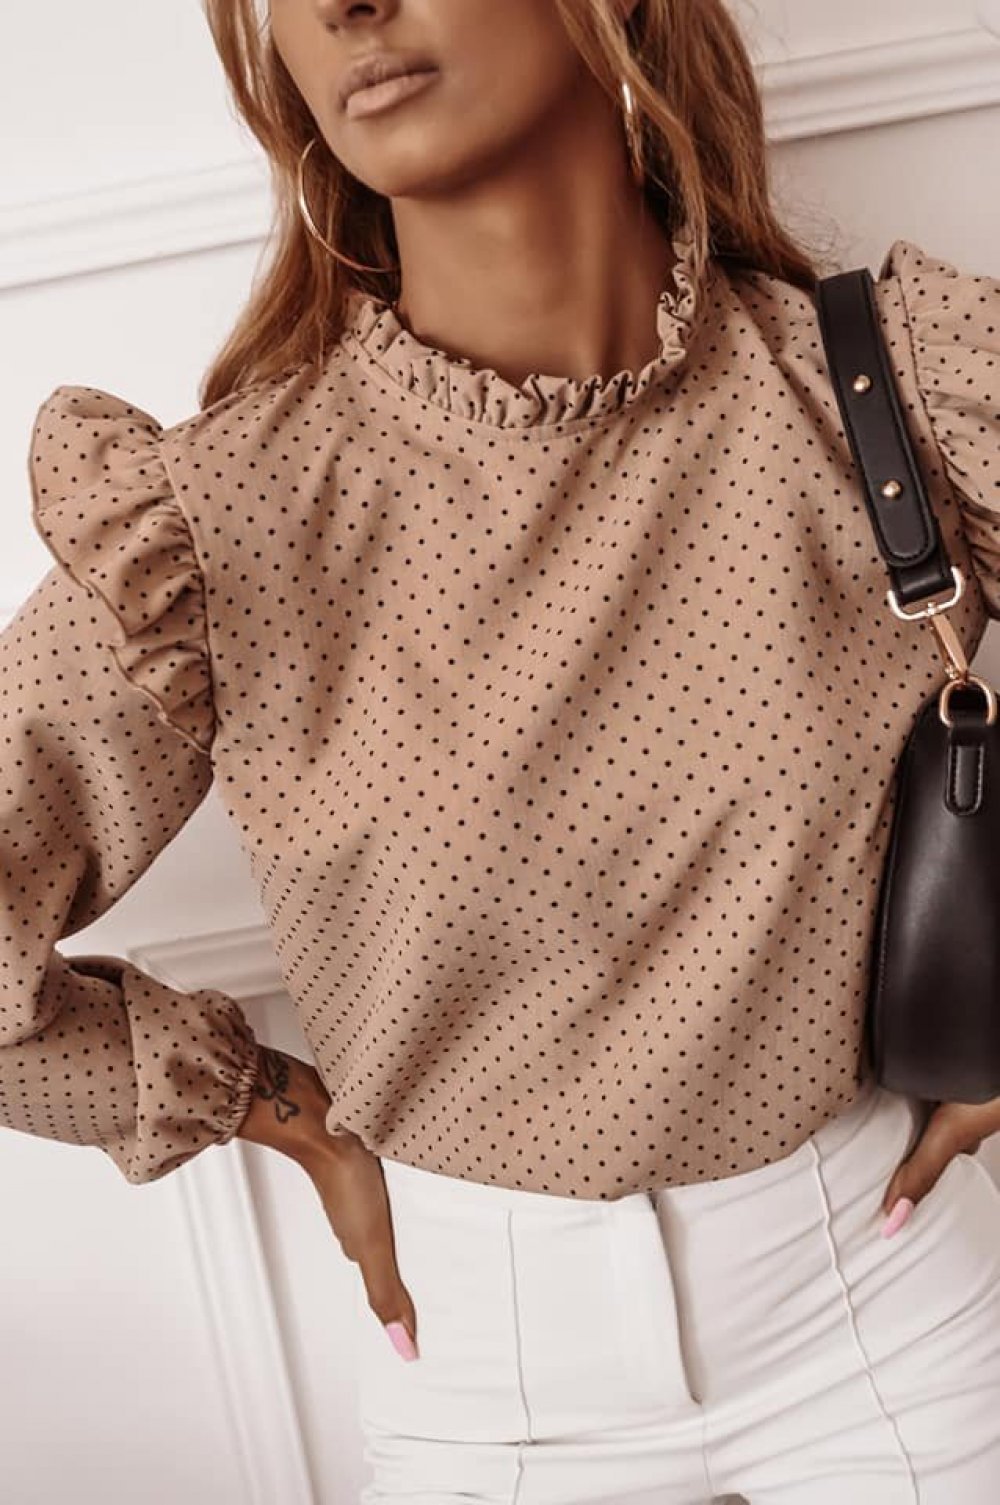 Polka dot button blouse with long sleeve ruffle for women